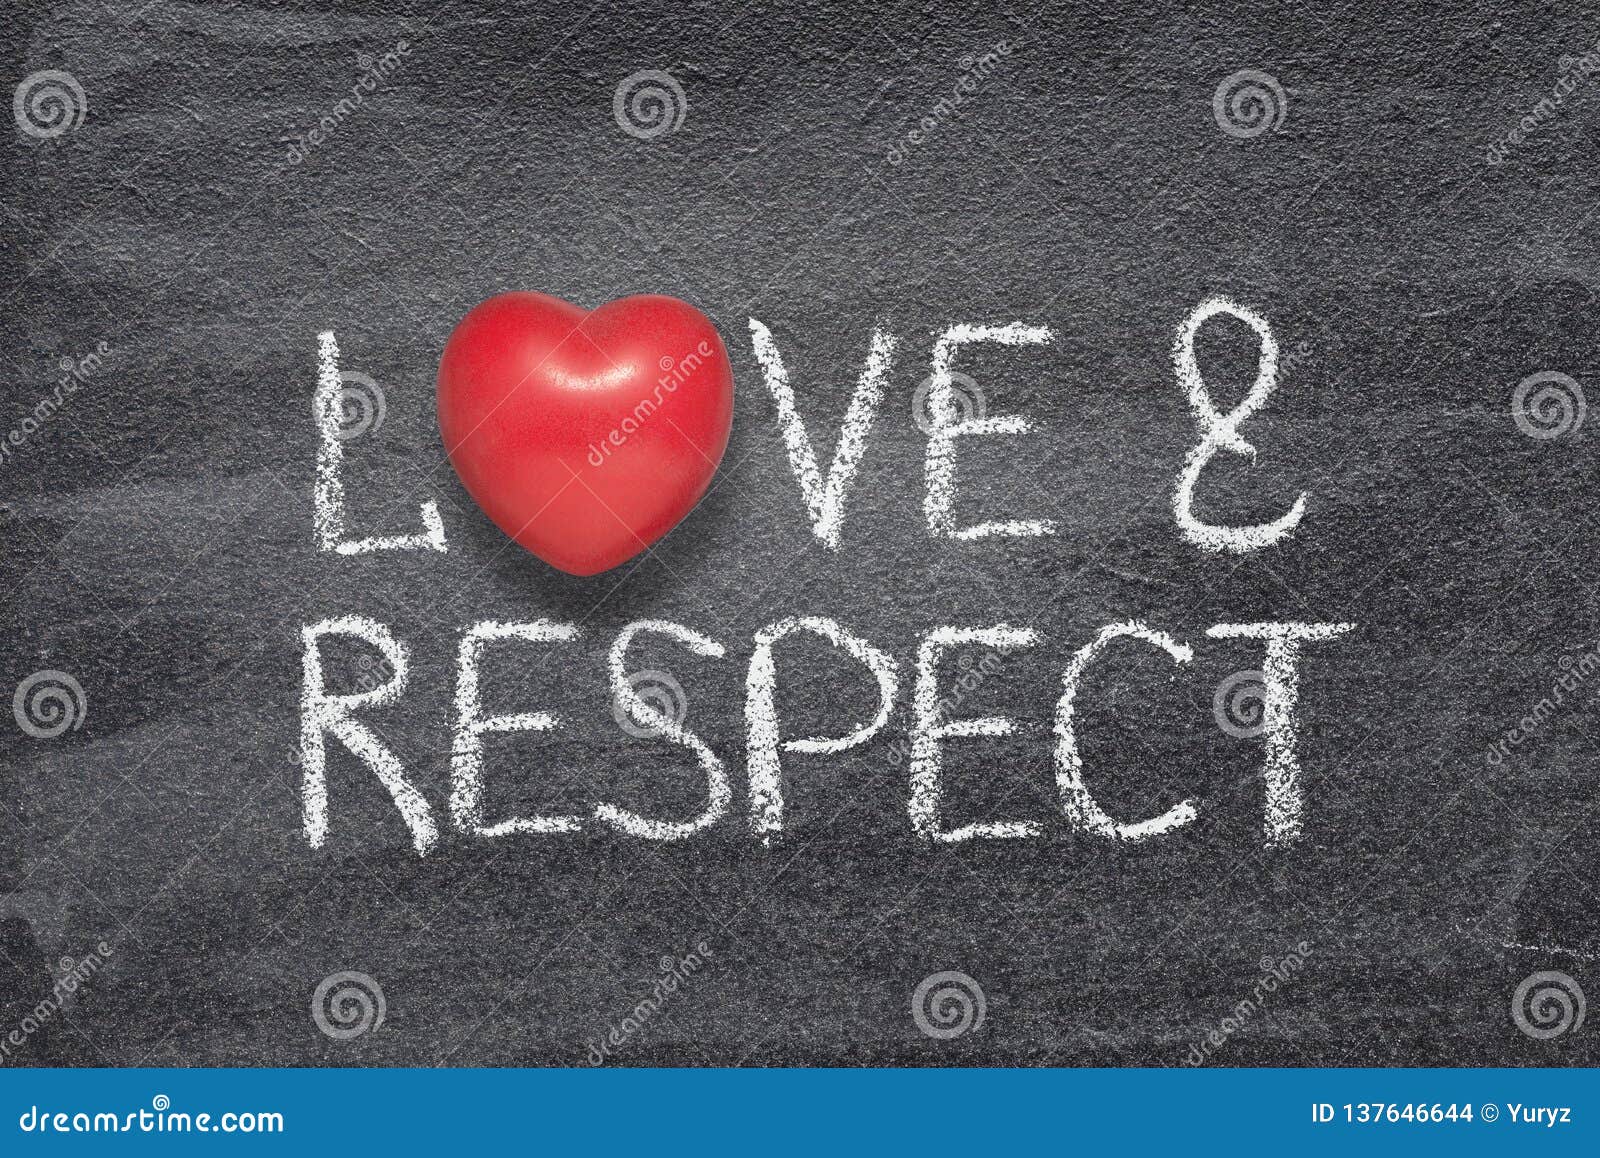 17,924 Love Respect Photos - Free  Royalty-Free Stock Photos from  Dreamstime